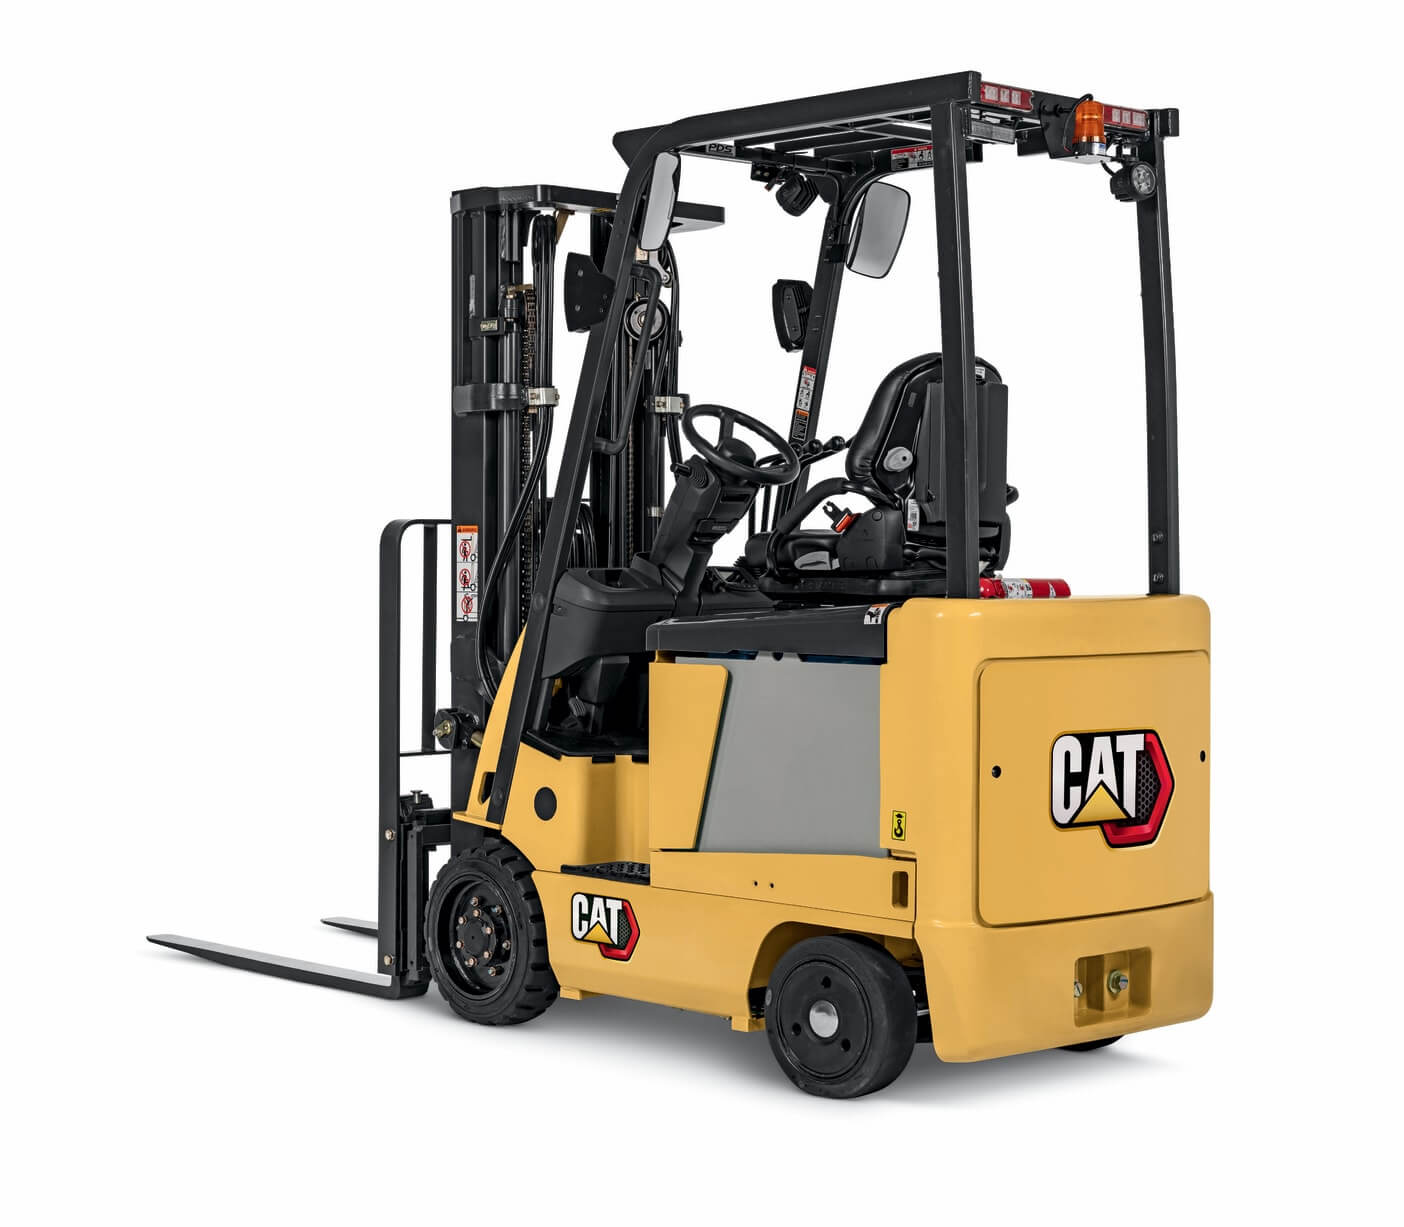 Large IC pneumatic tire forklifts